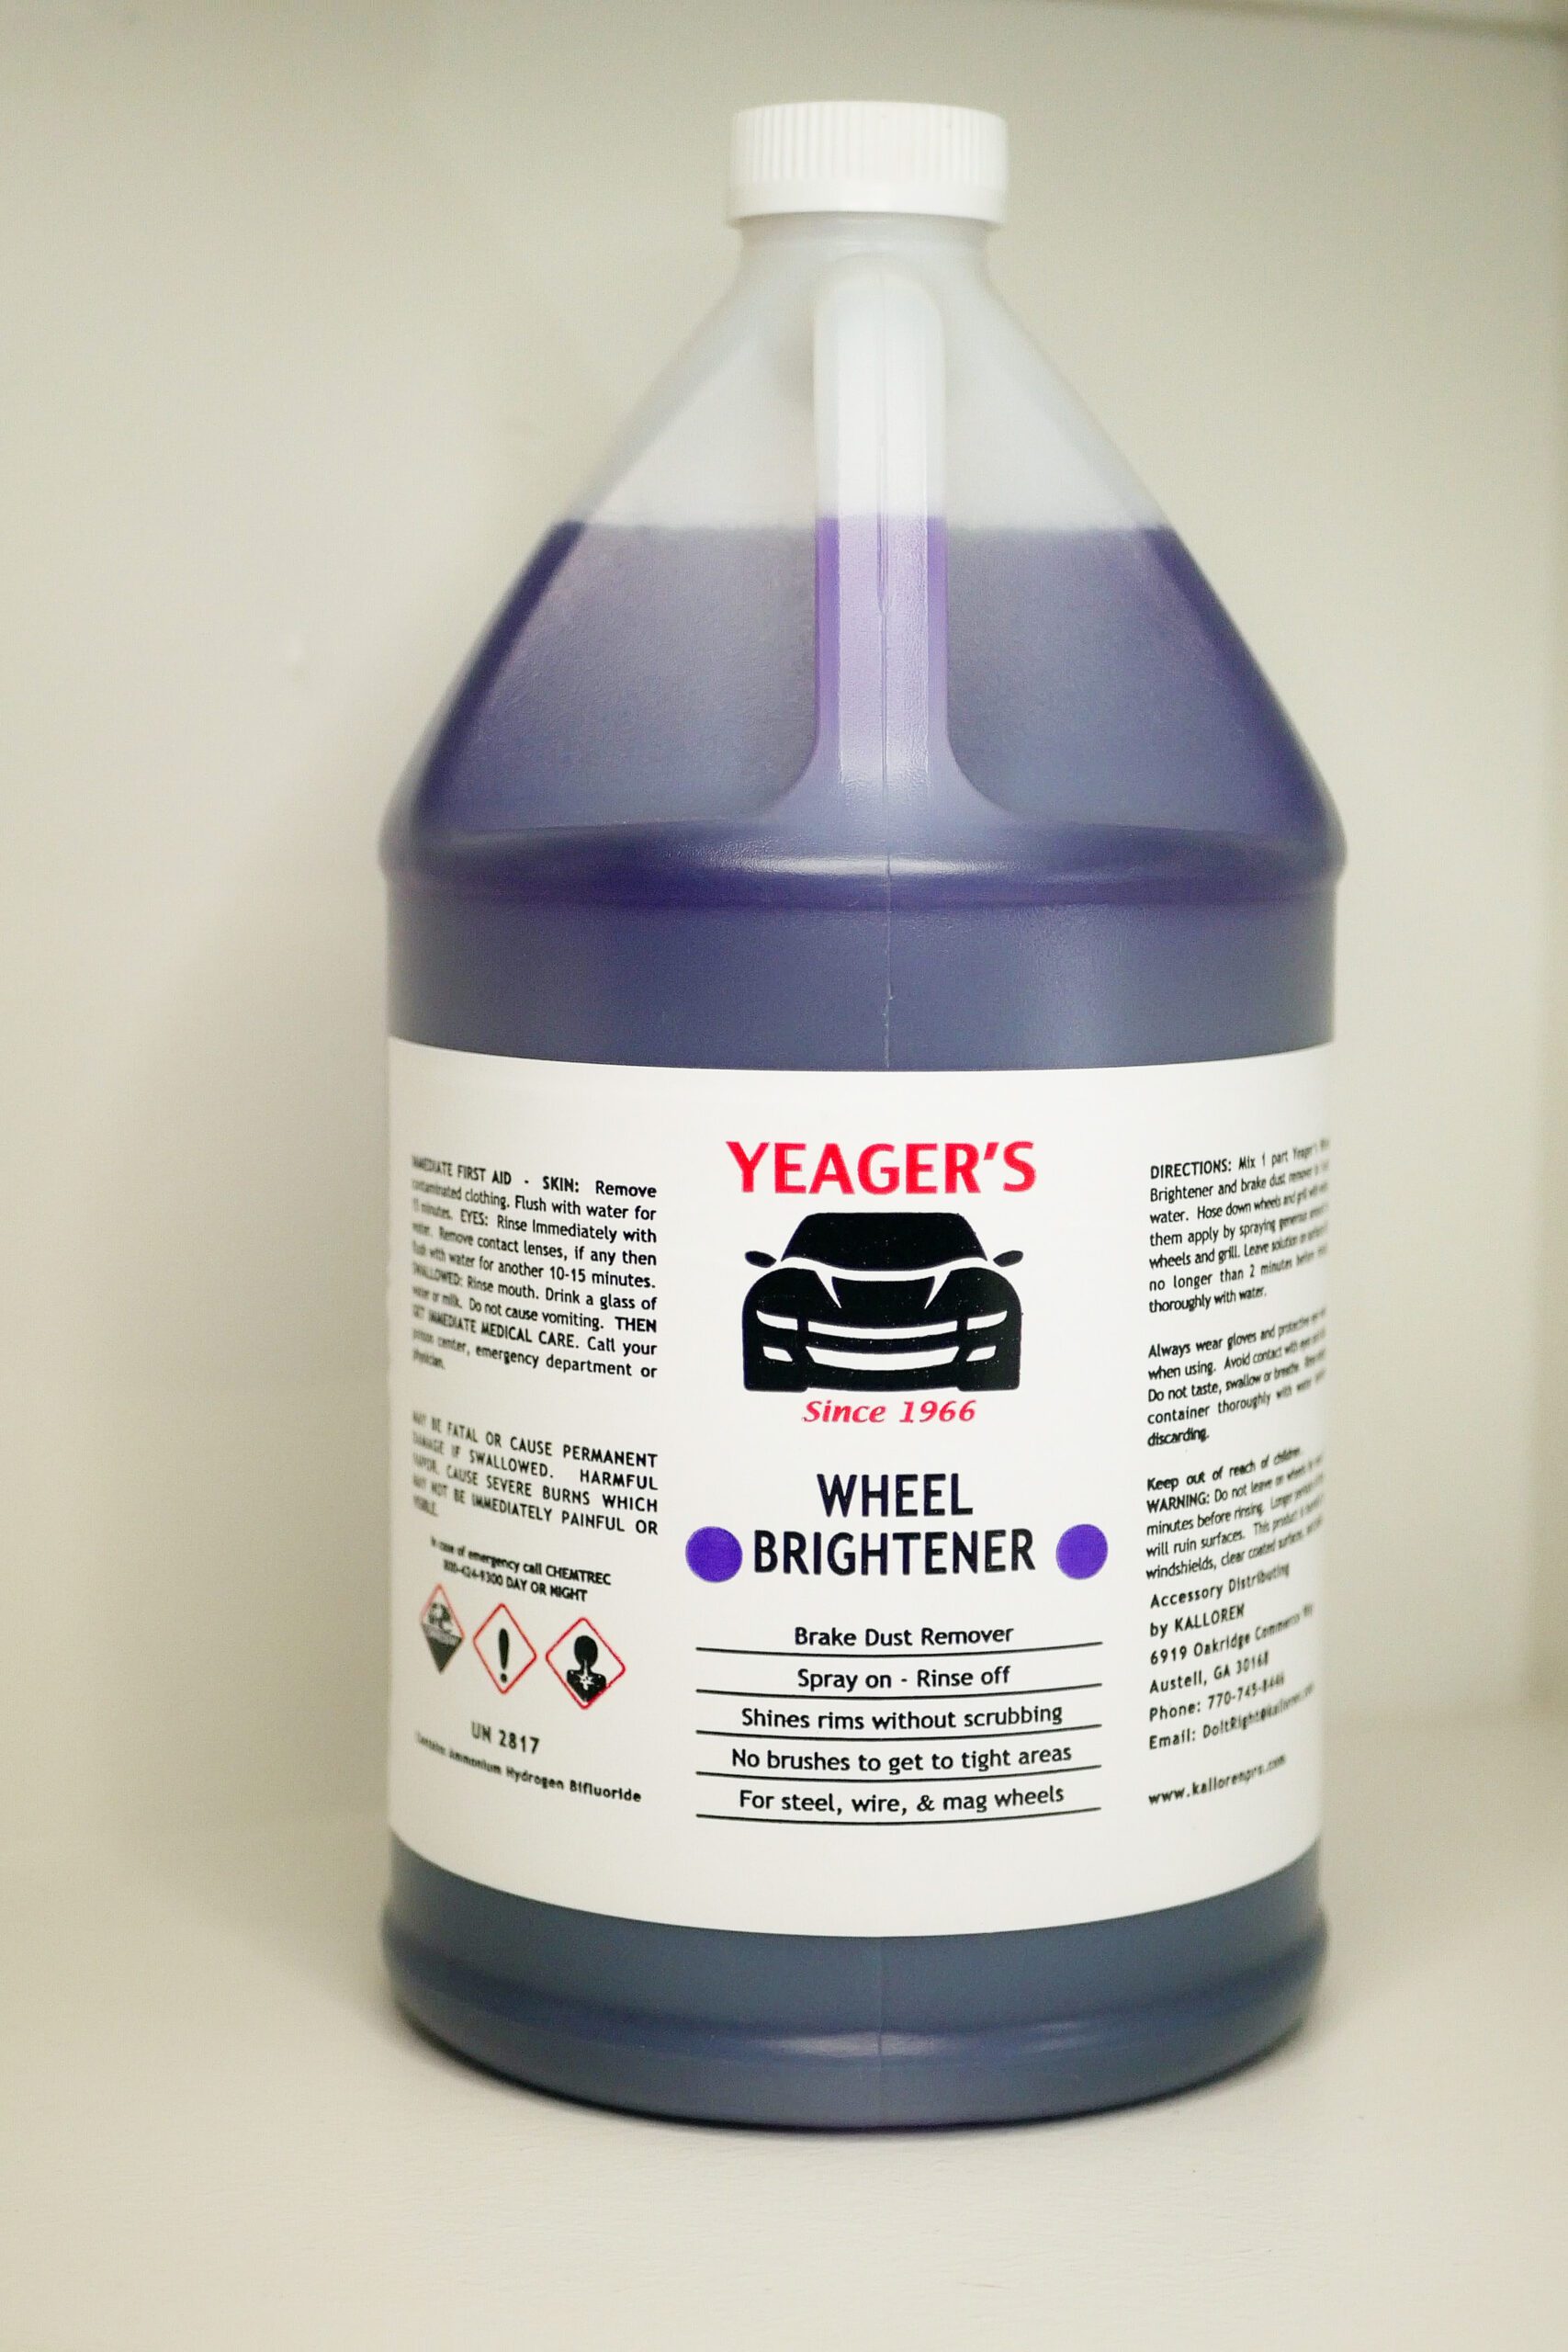 YEAGER'S CAR WASH & WAX - YEAGER'S DETAILING SUPPLIESYeager's Auto